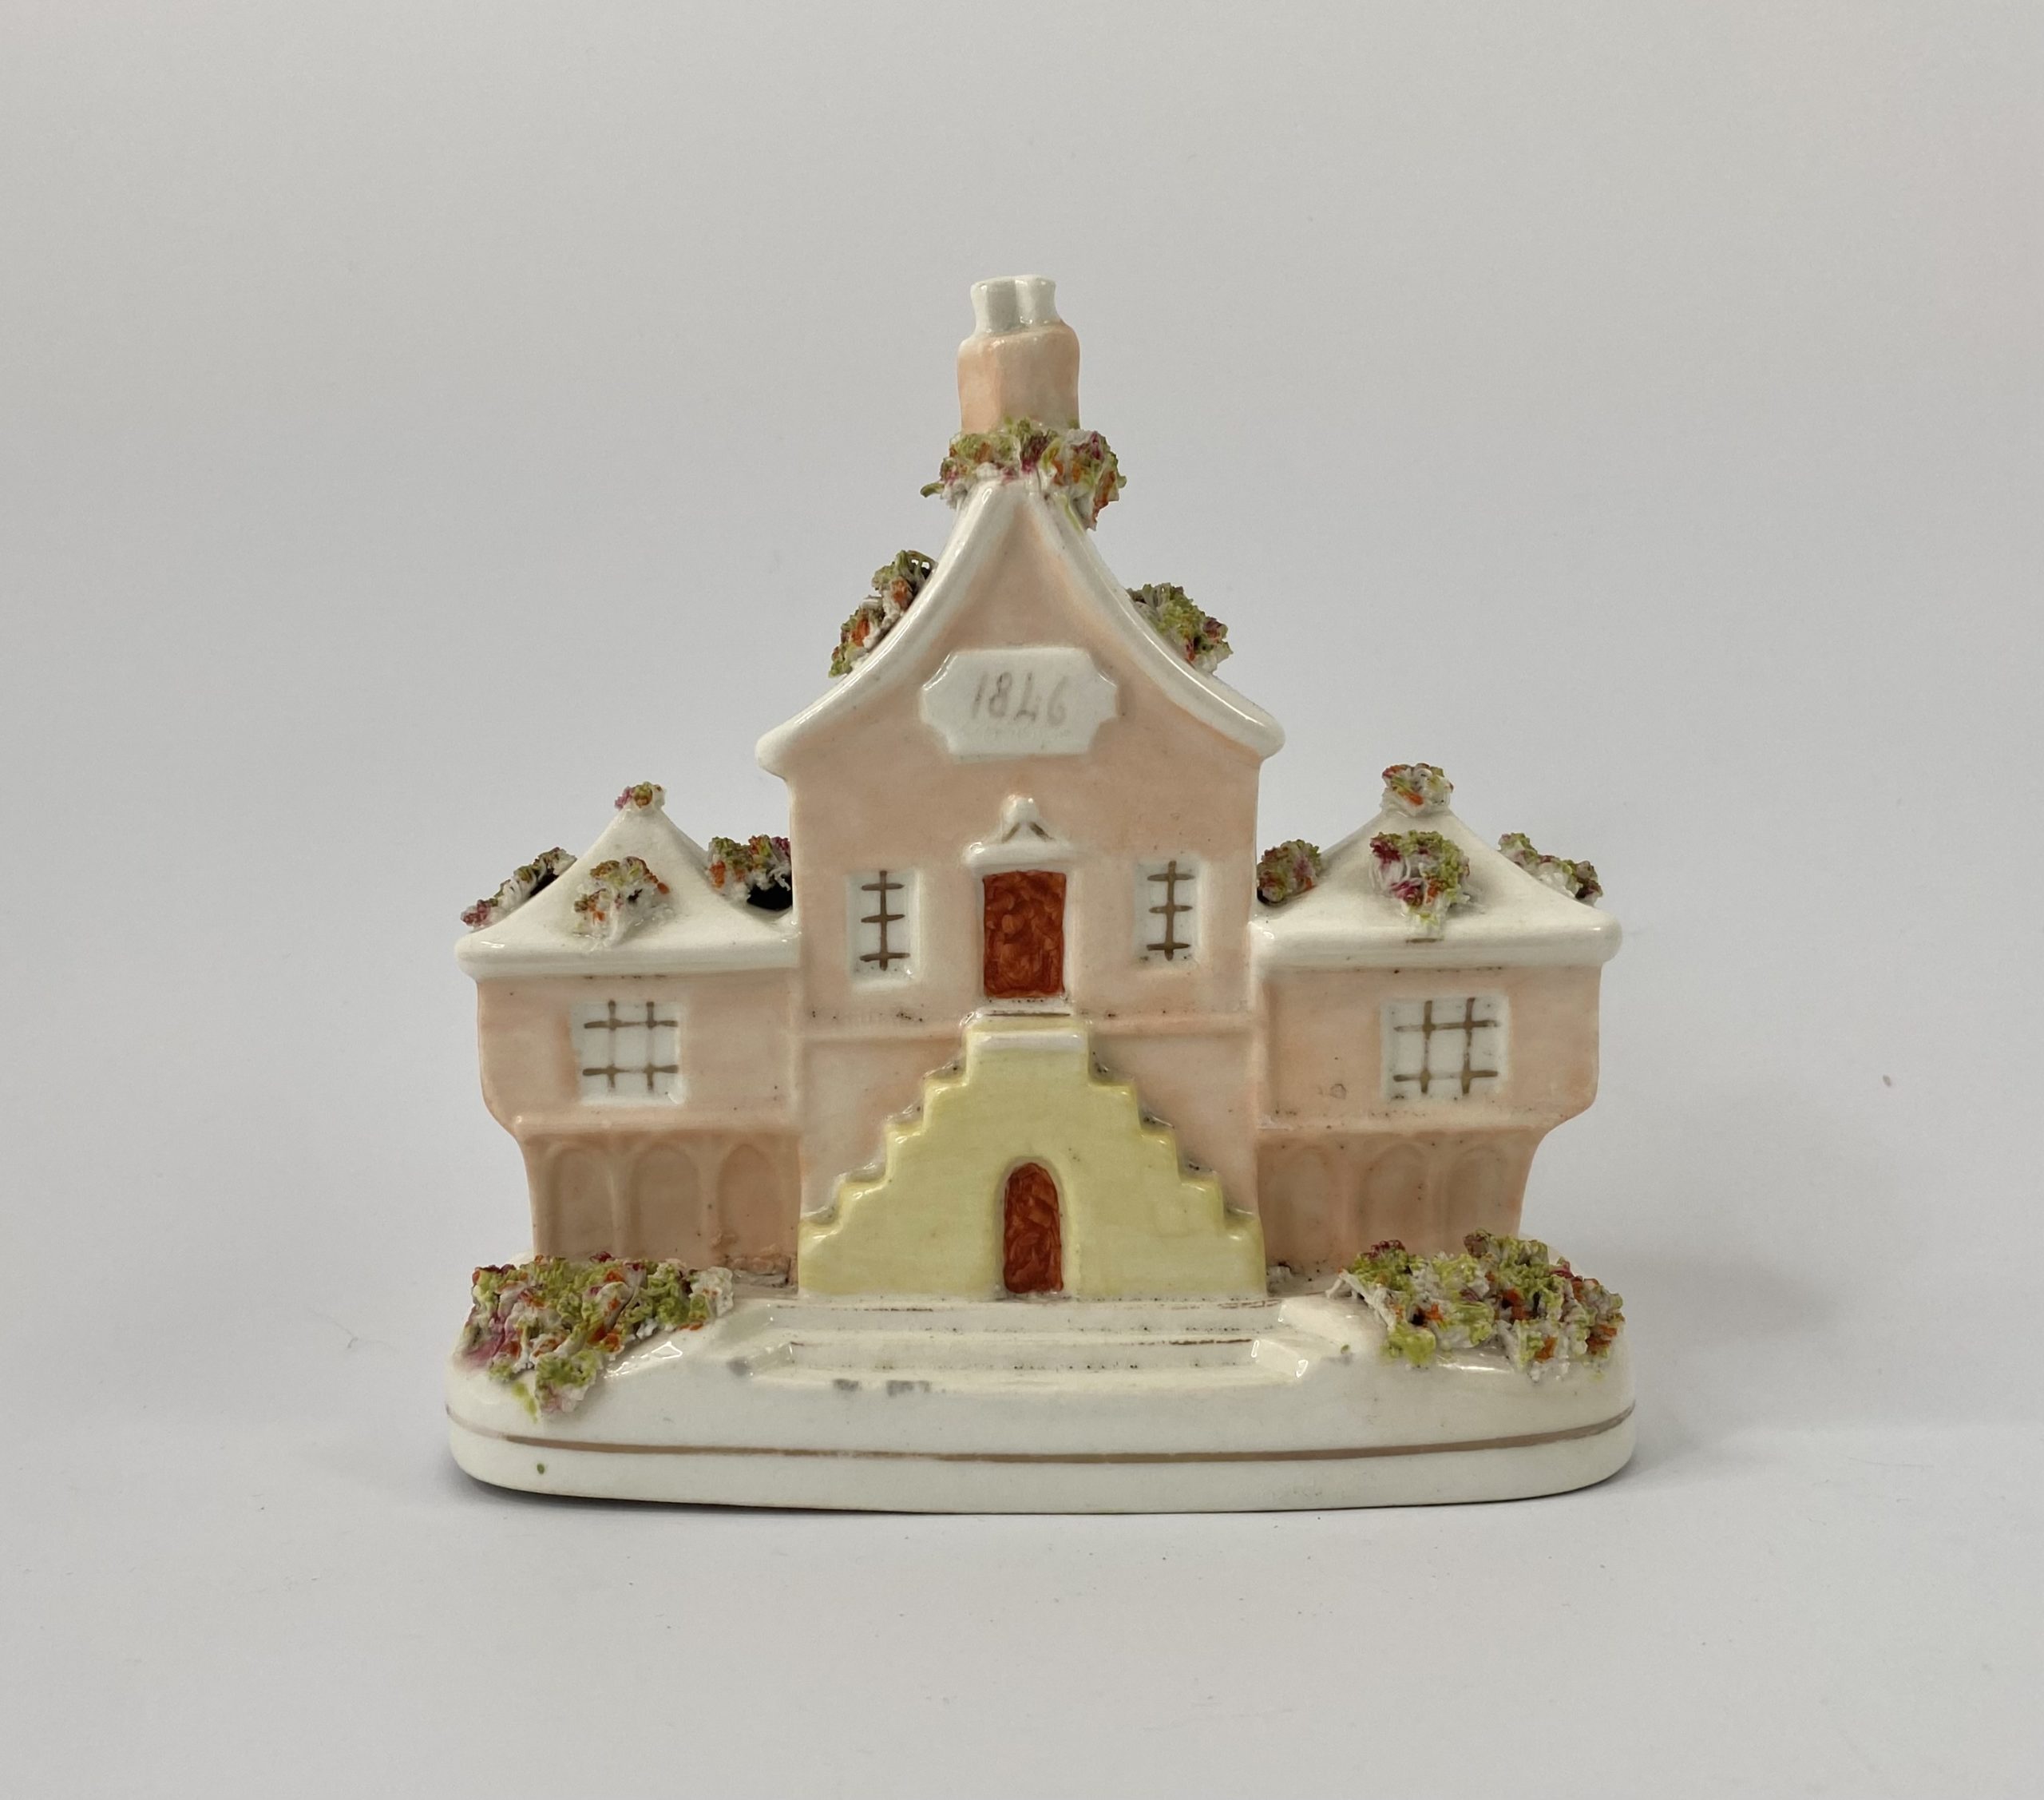 Staffordshire porcelaneous cottage, dated 1846